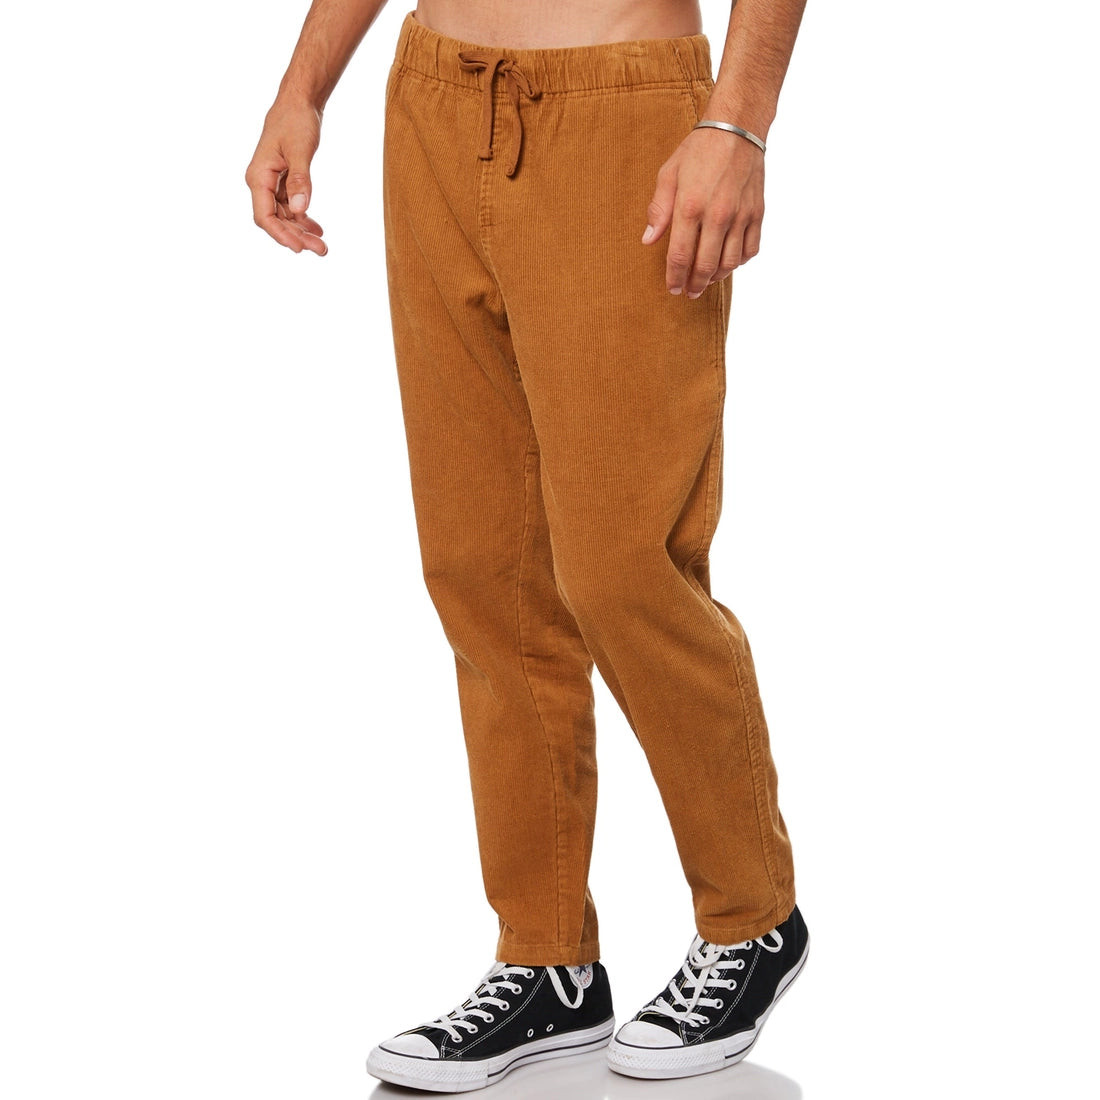 All Day Corduroy Pant - AMBER